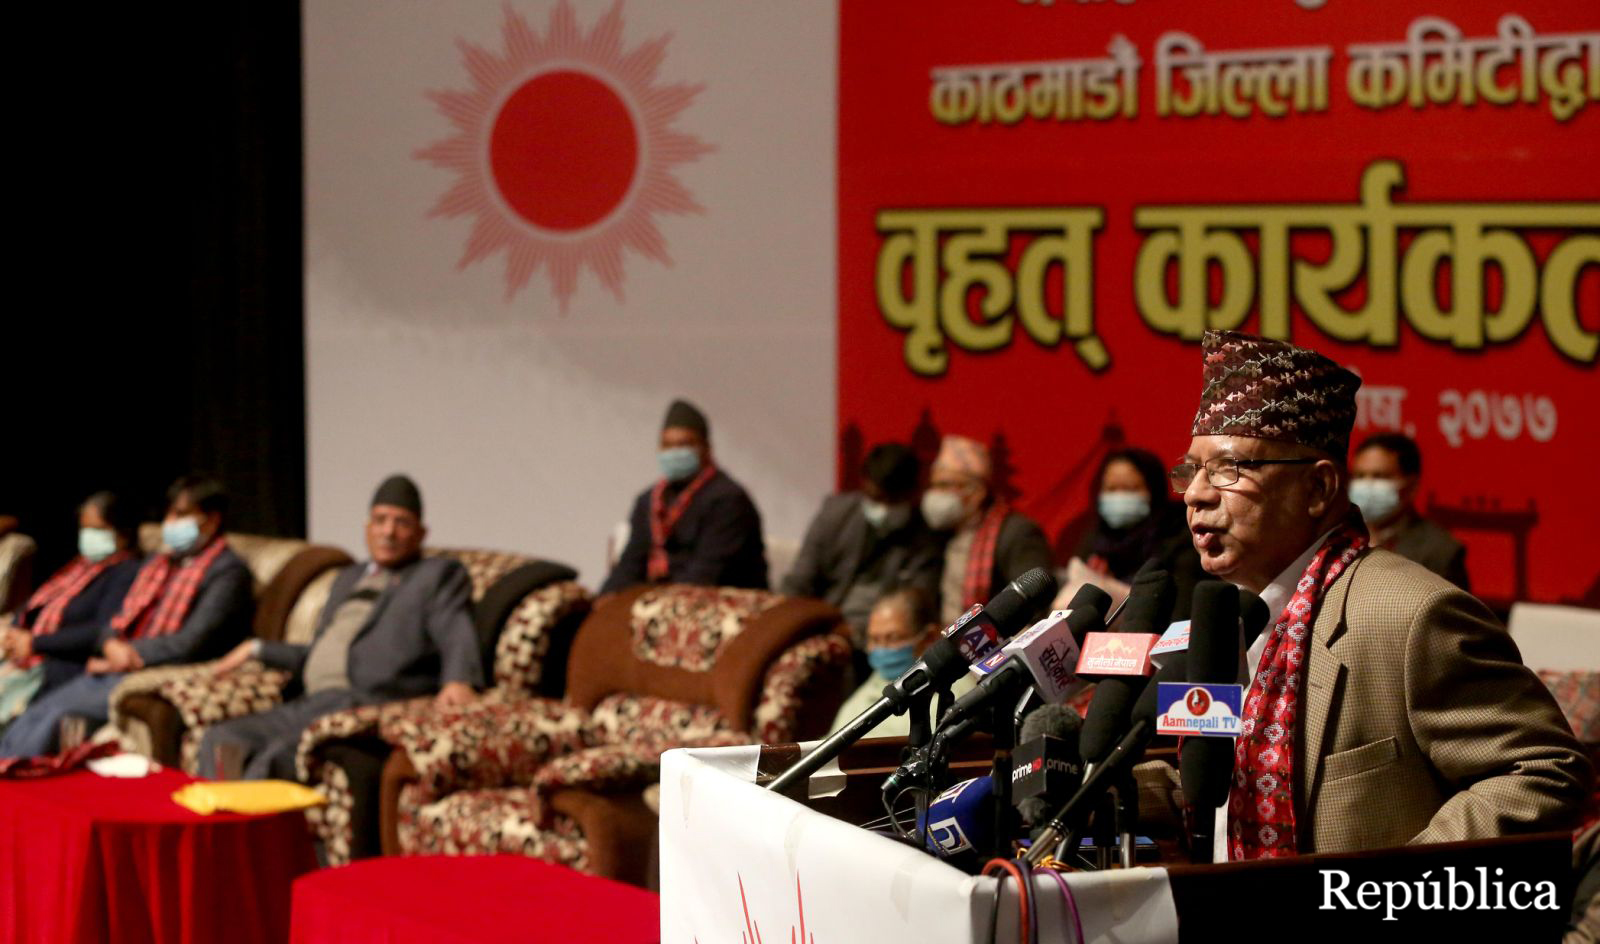 Dahal-Nepal faction chair Nepal rules out possibility of unity and cooperation with Oli